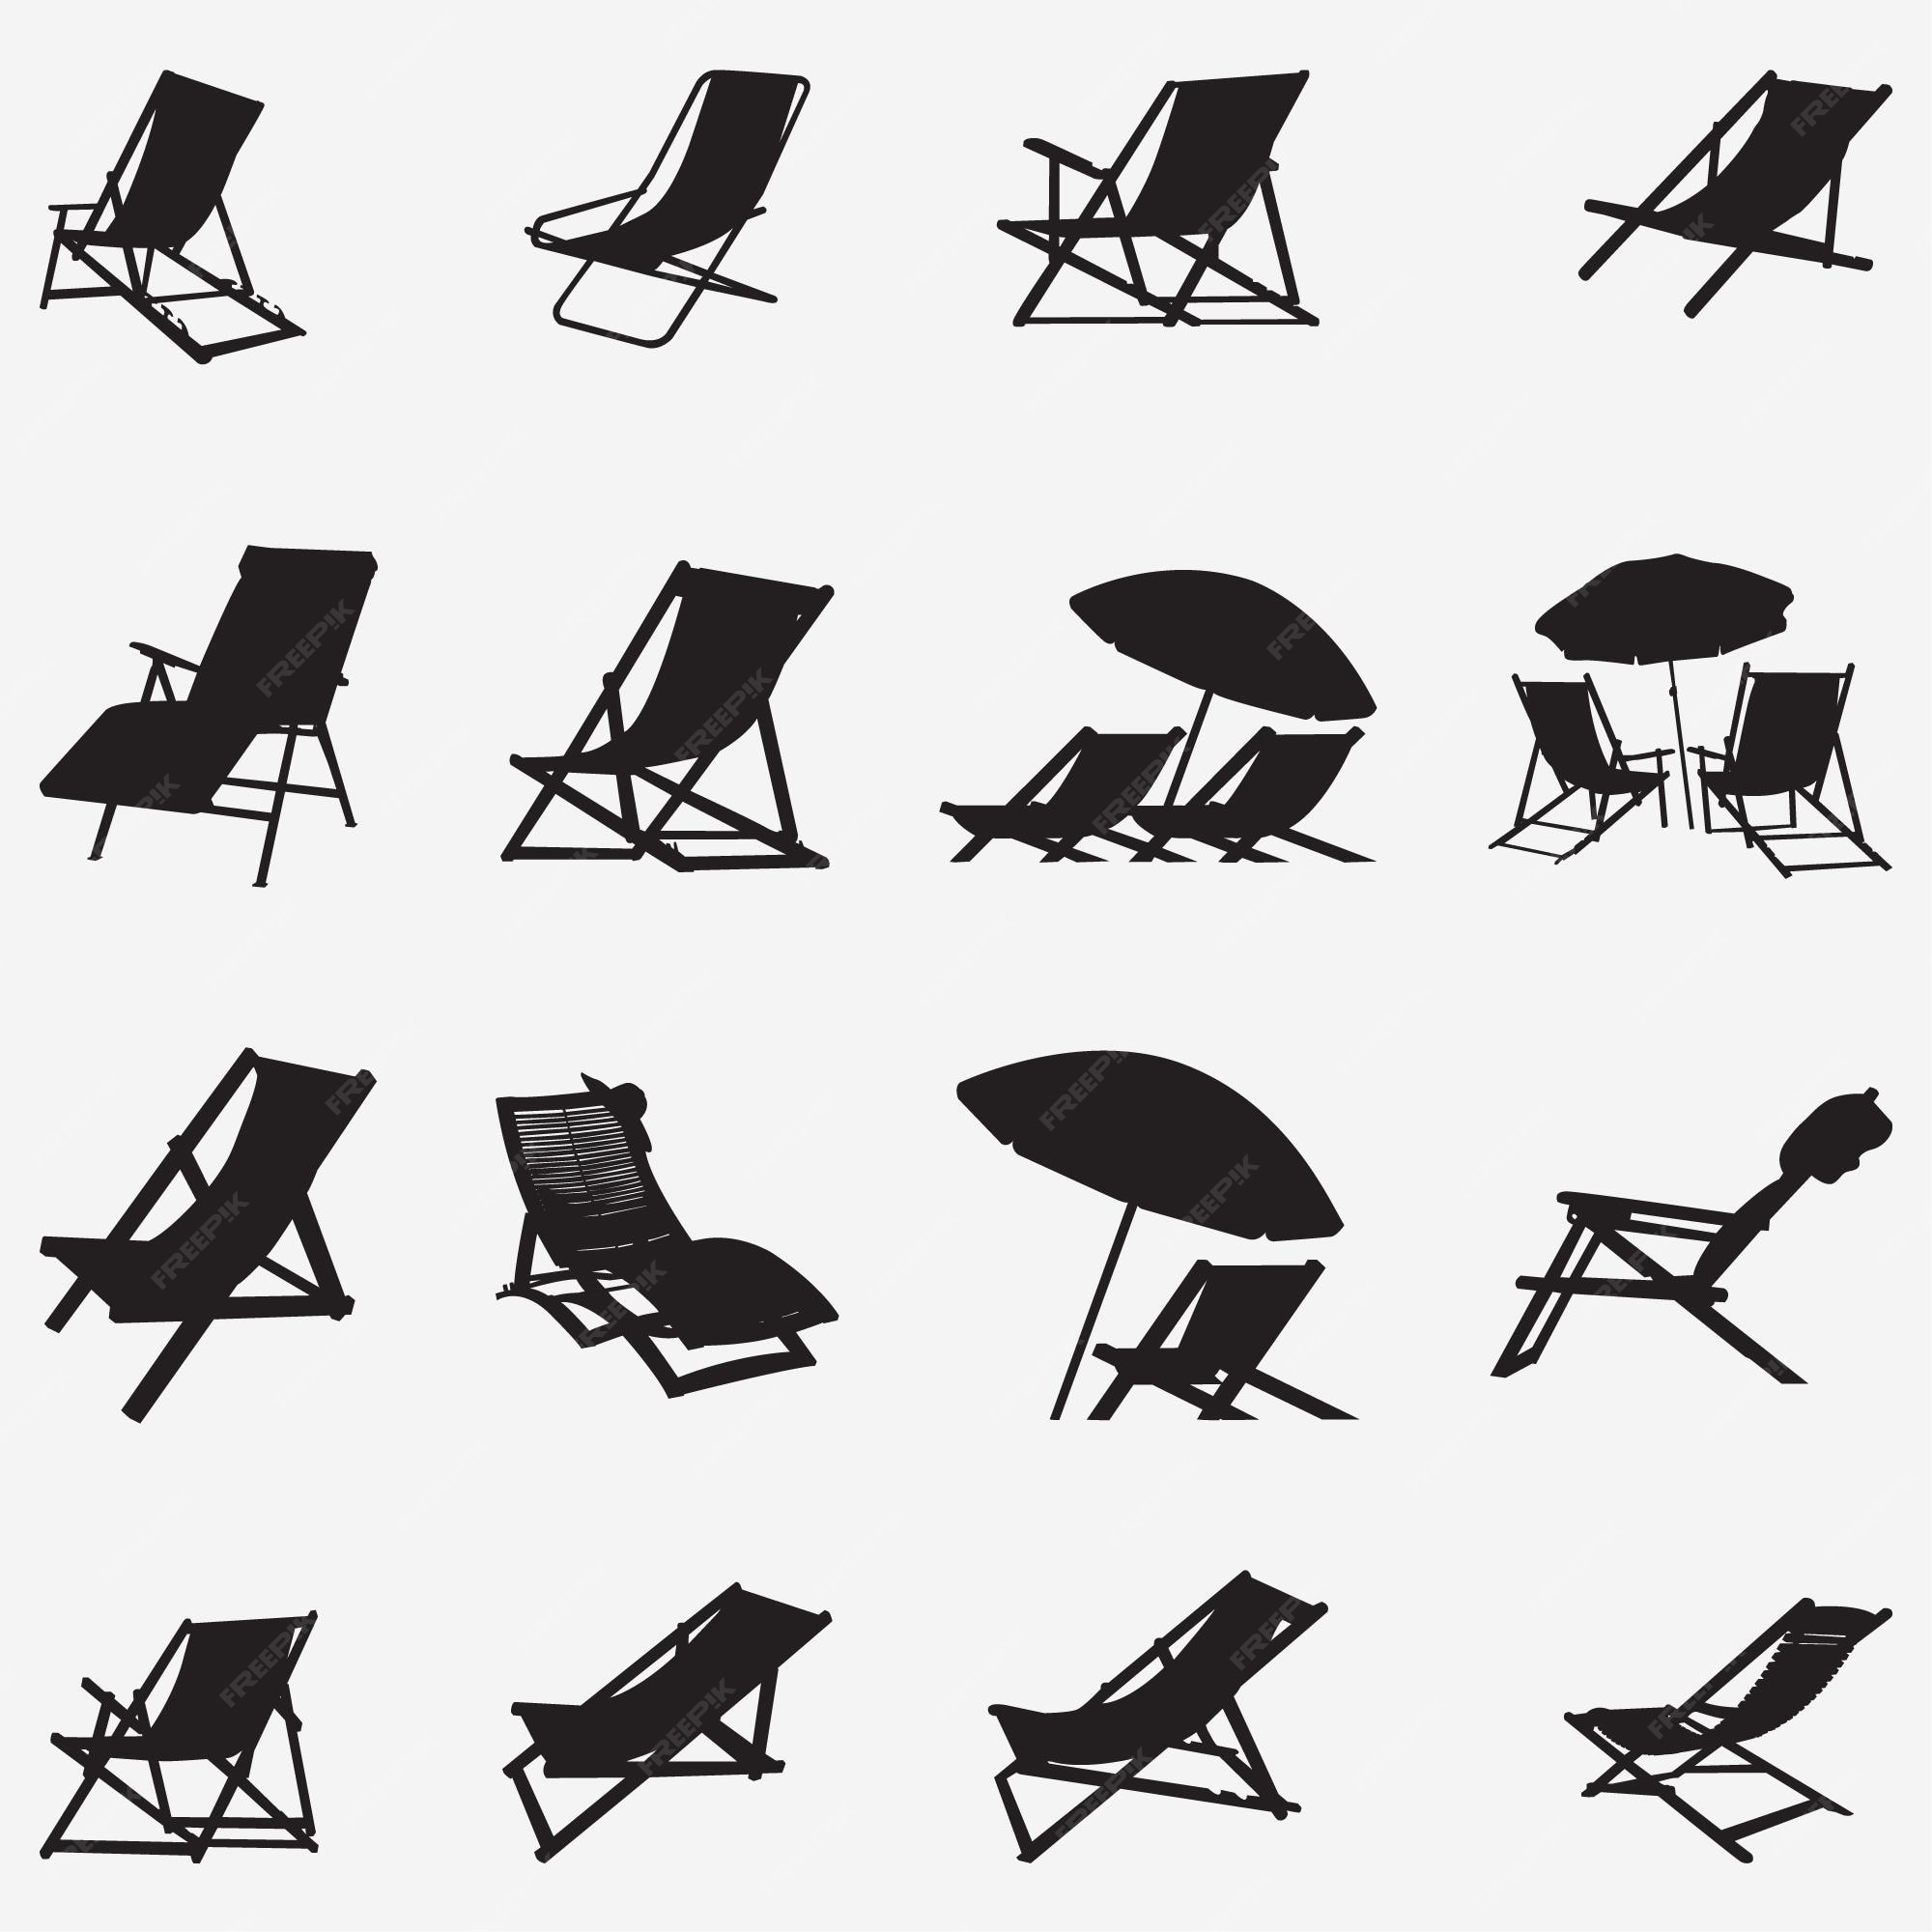 Beach Chair Images Free Download On Freepik | vlr.eng.br